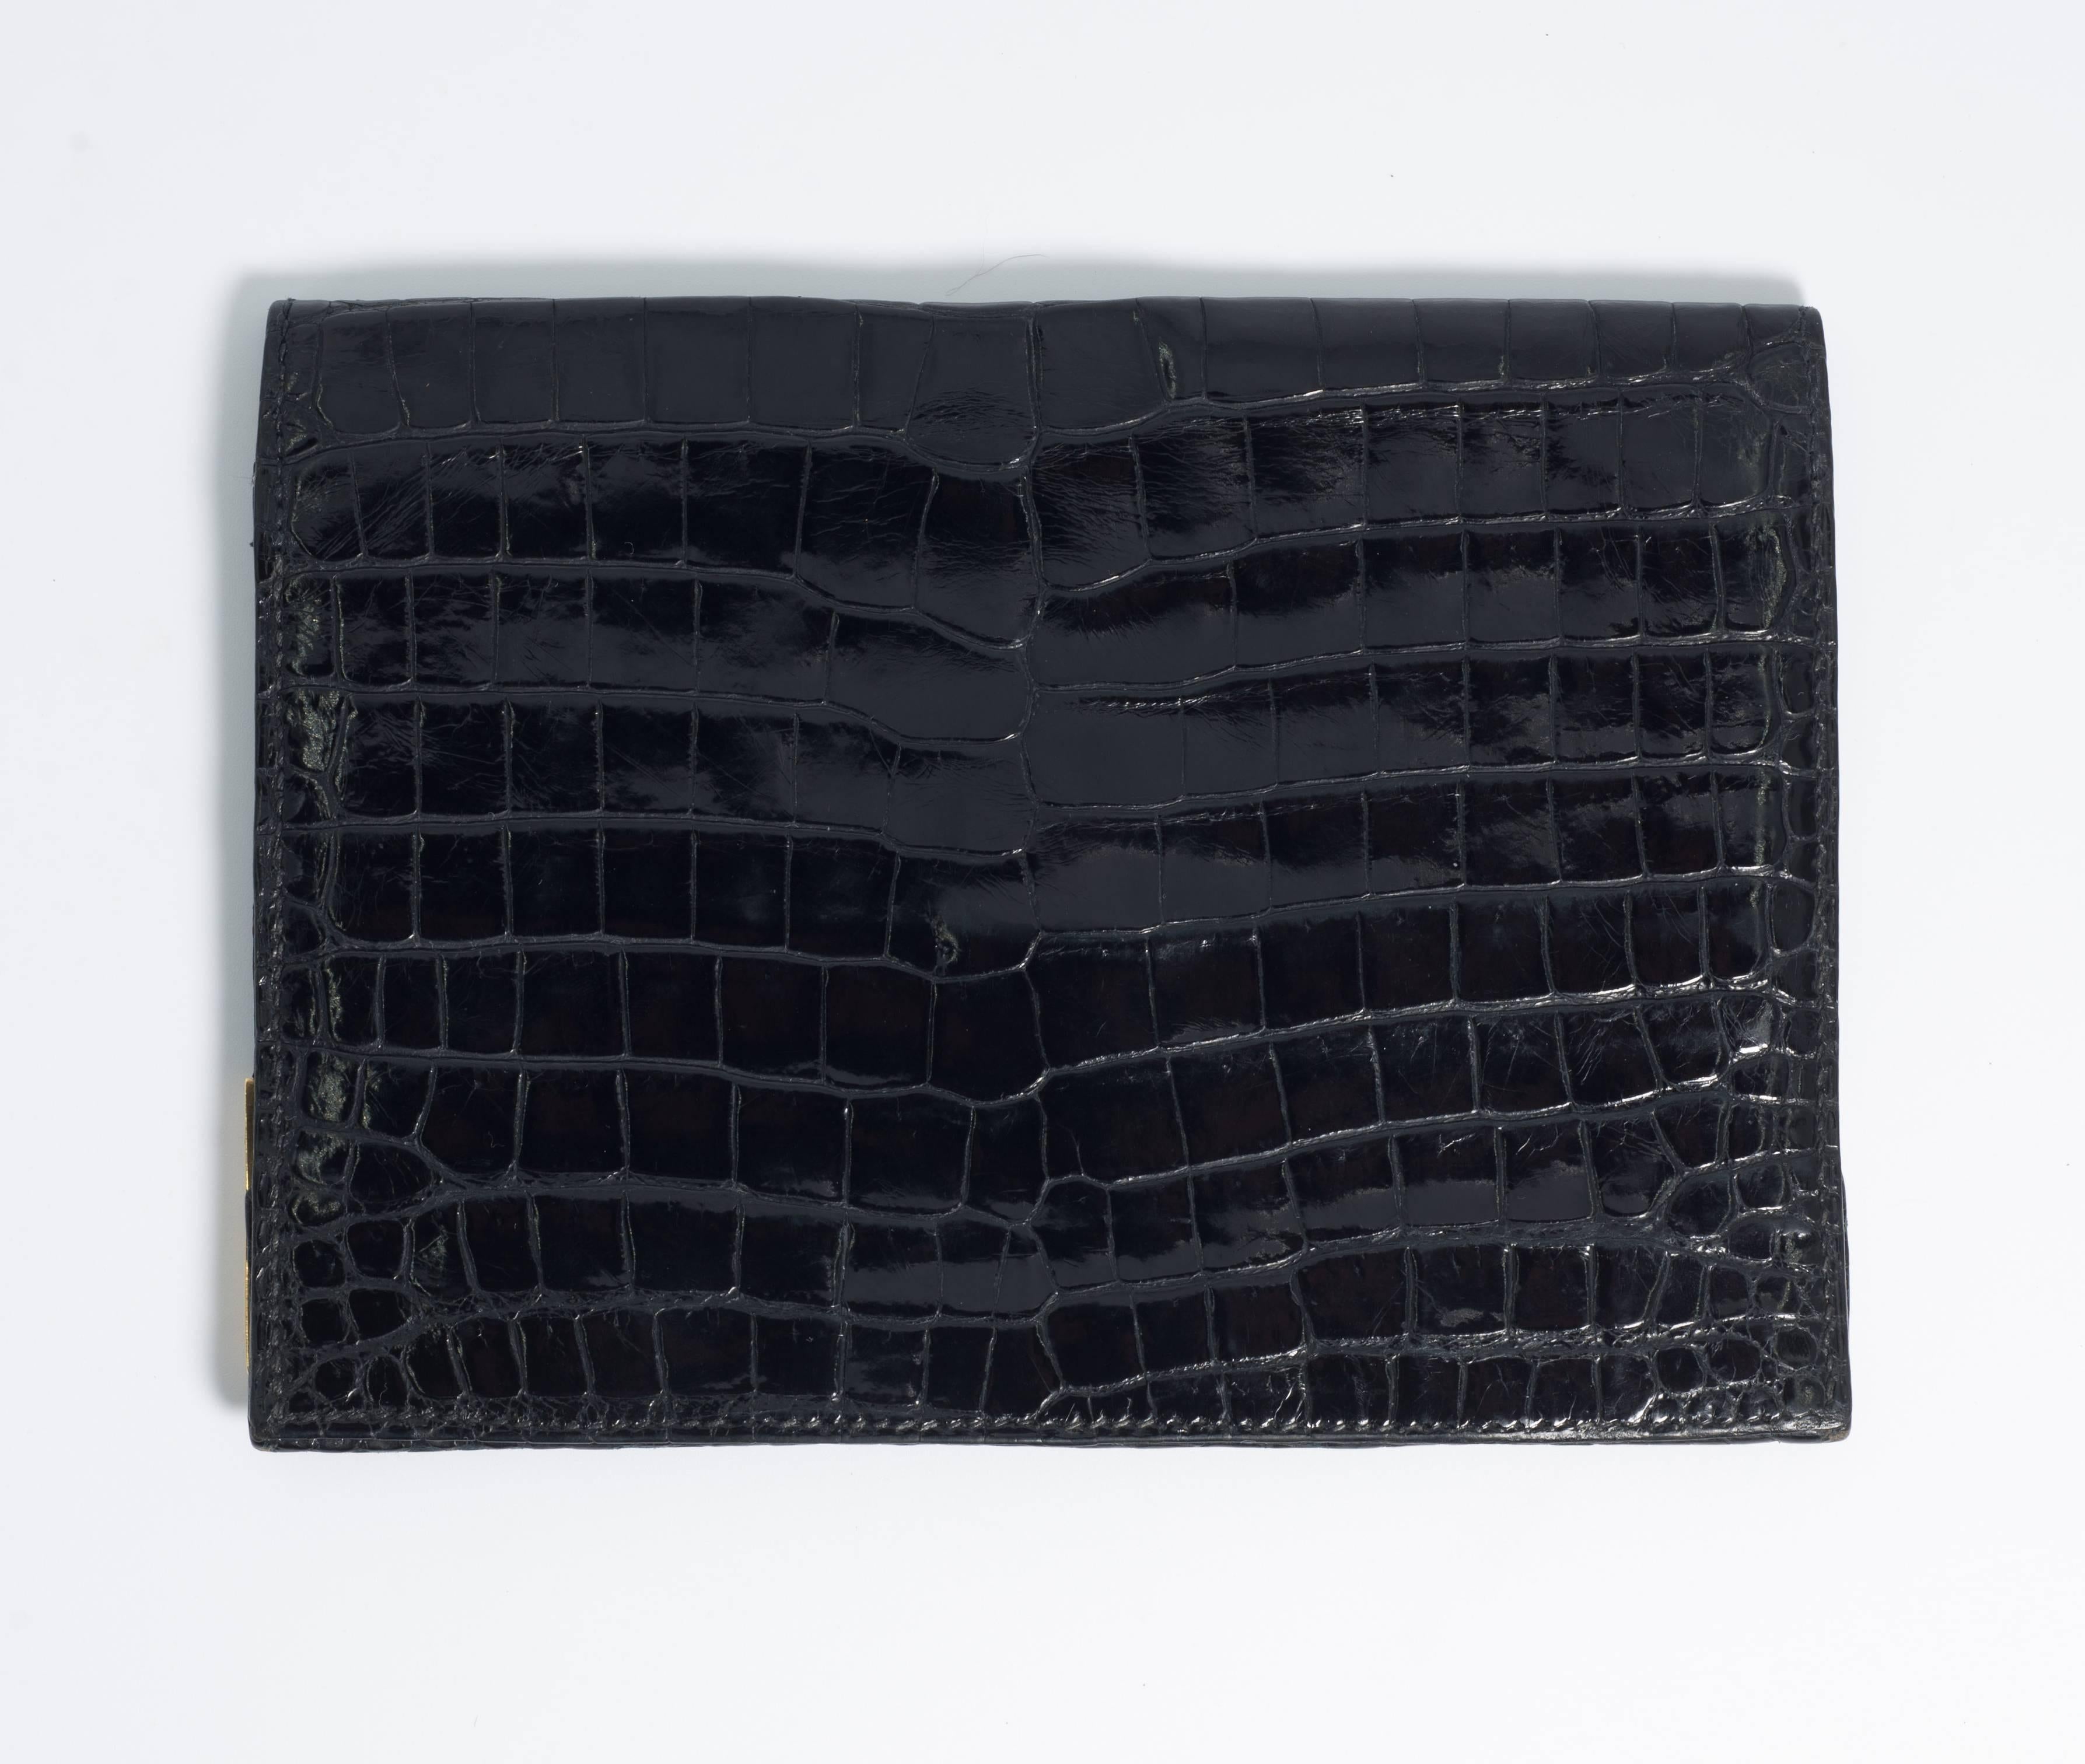 Superb Hermes Paris 1960s gentleman's black African crocodile gold cornered wallet
fully lined in matching crocodile. Opens up end to end through the tab. Pockets for cards etc. Stamped Hermes Paris
Provenance of a Gentleman
Measures 6 x 4 and